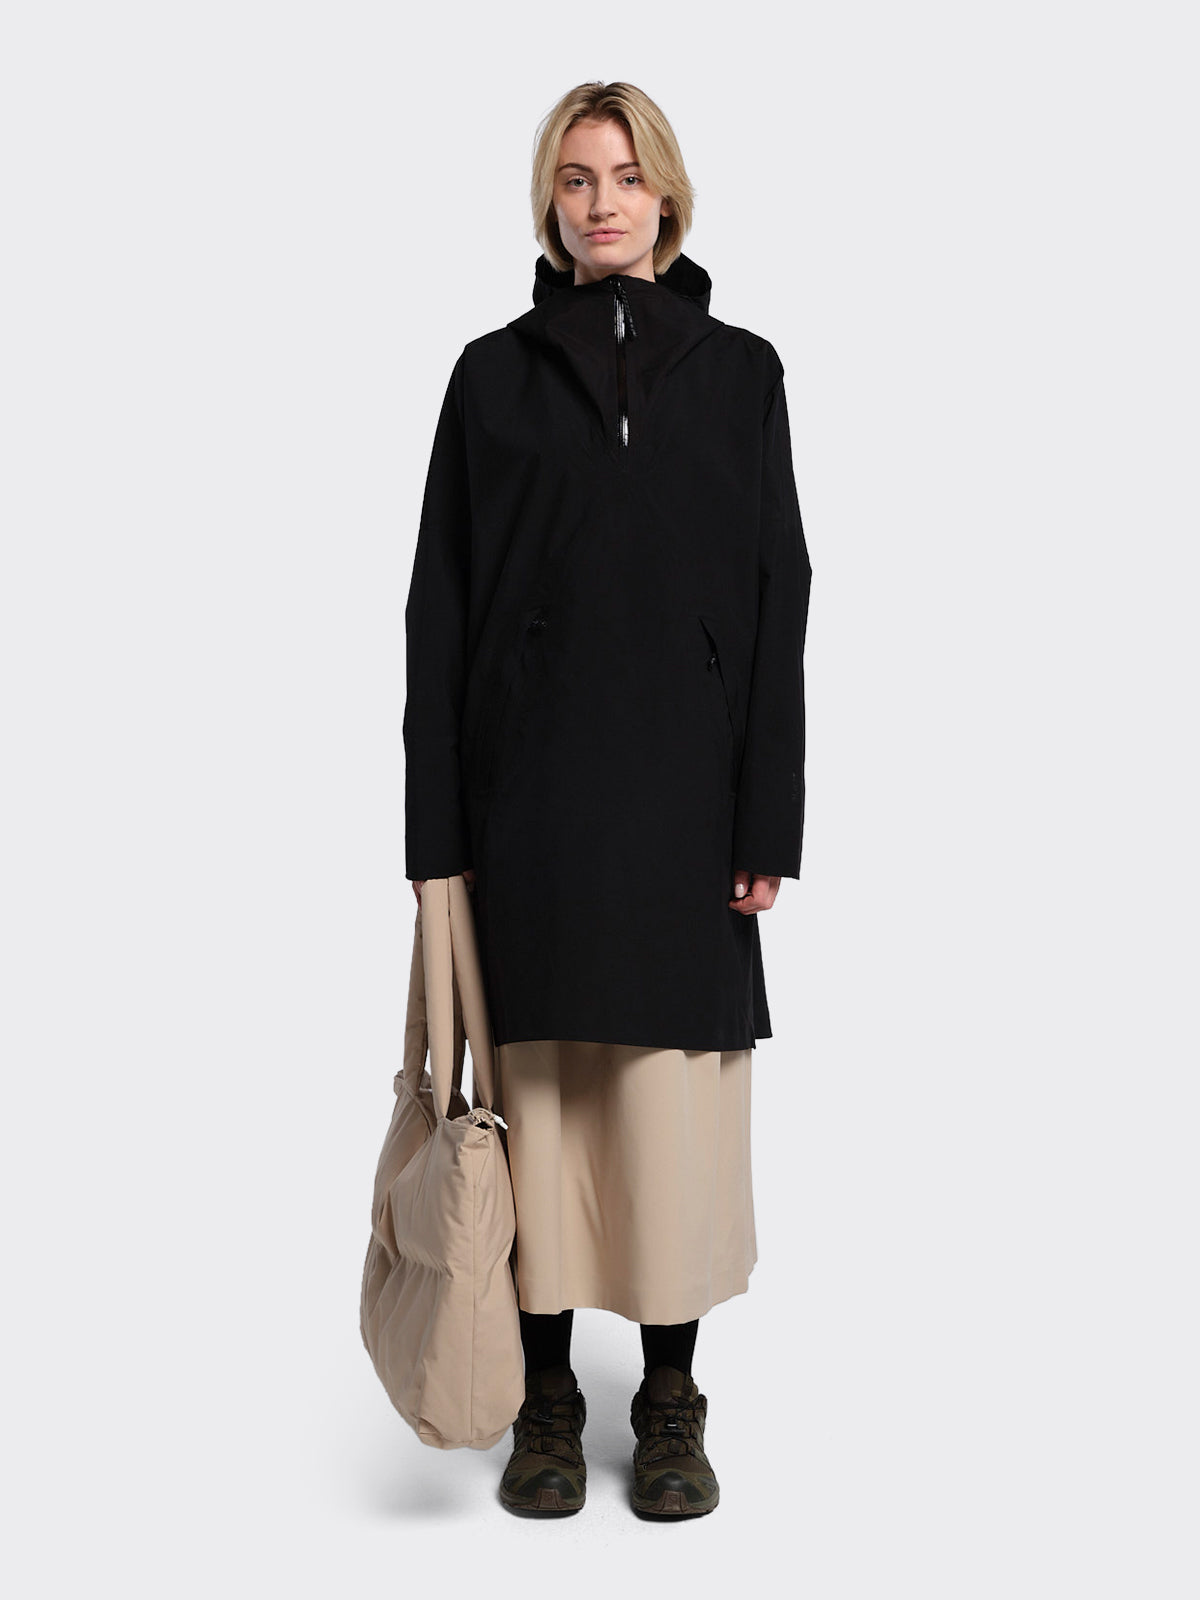 Woman with Pillow bag from Blæst in Beige